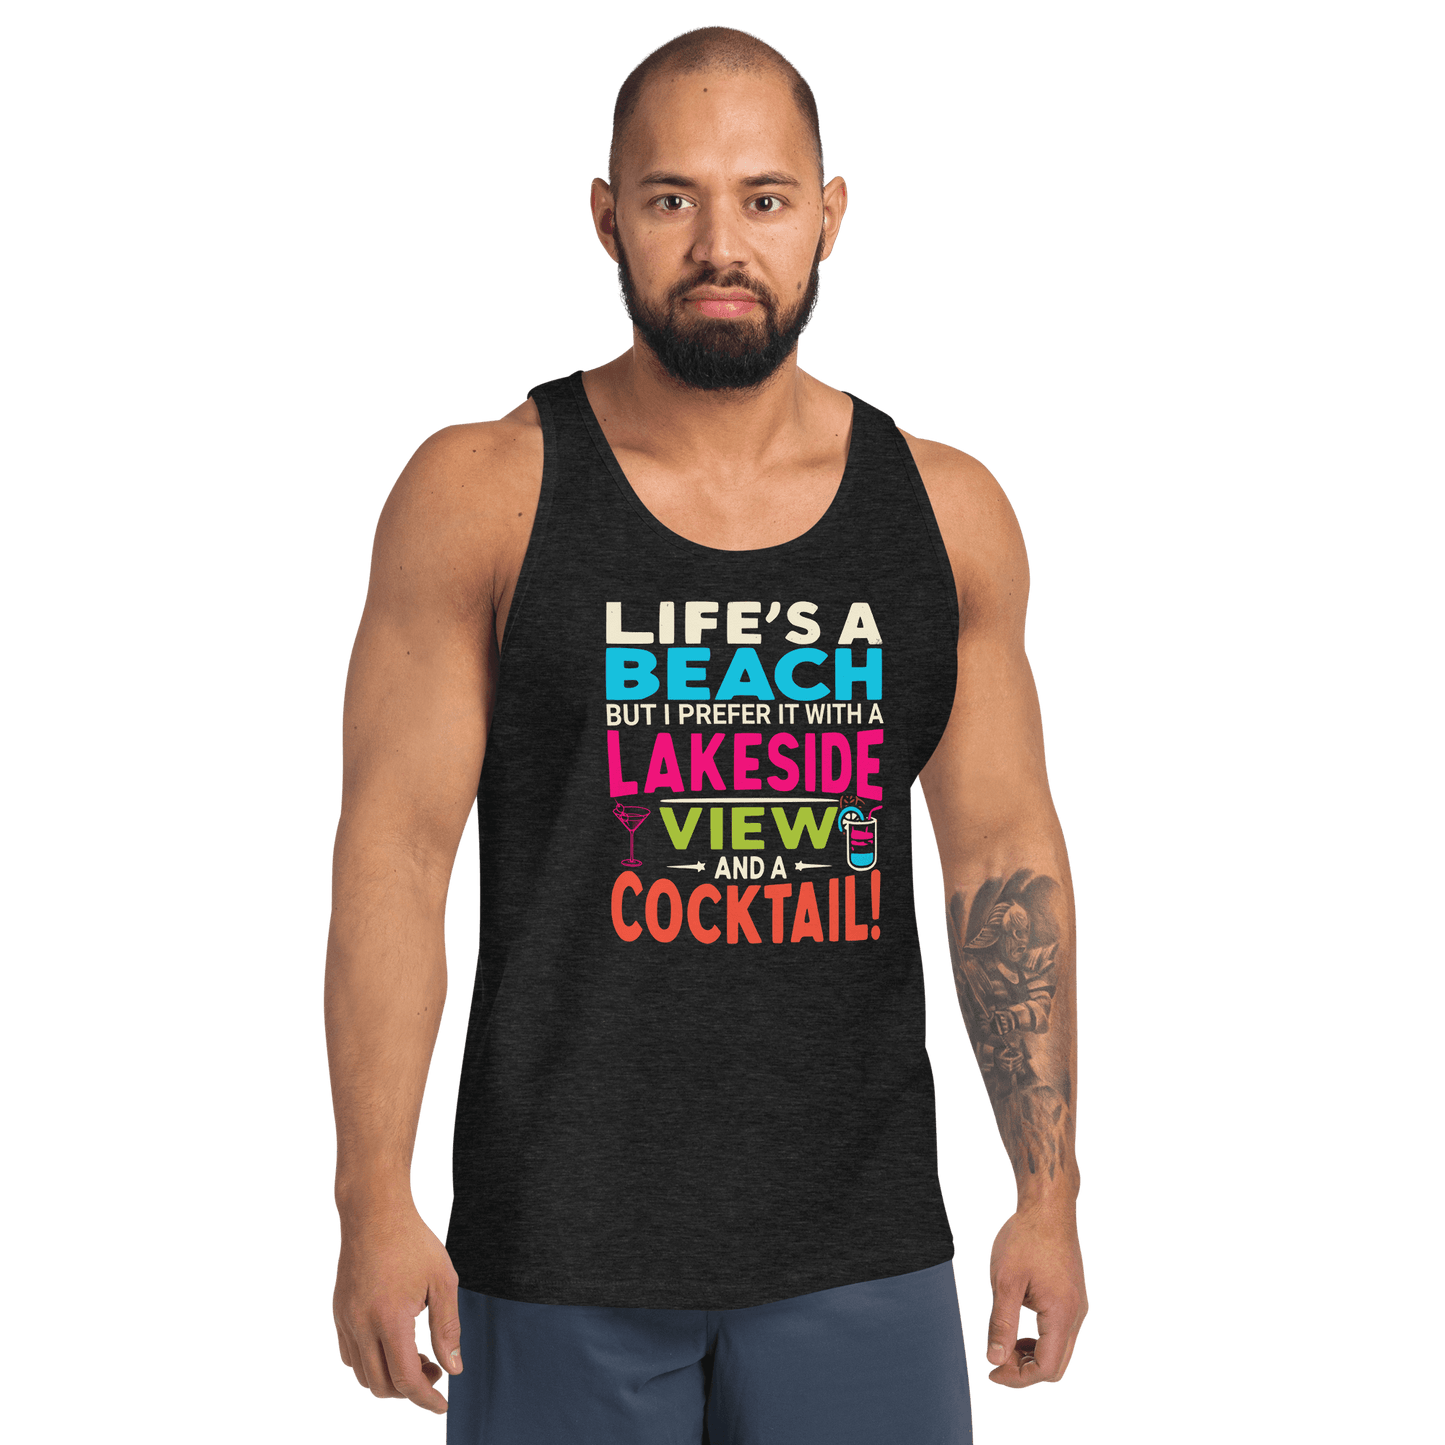 Men's tank top featuring "Life's a Beach but I Prefer It with a Lakeside View and a Cocktail" in vibrant colors.